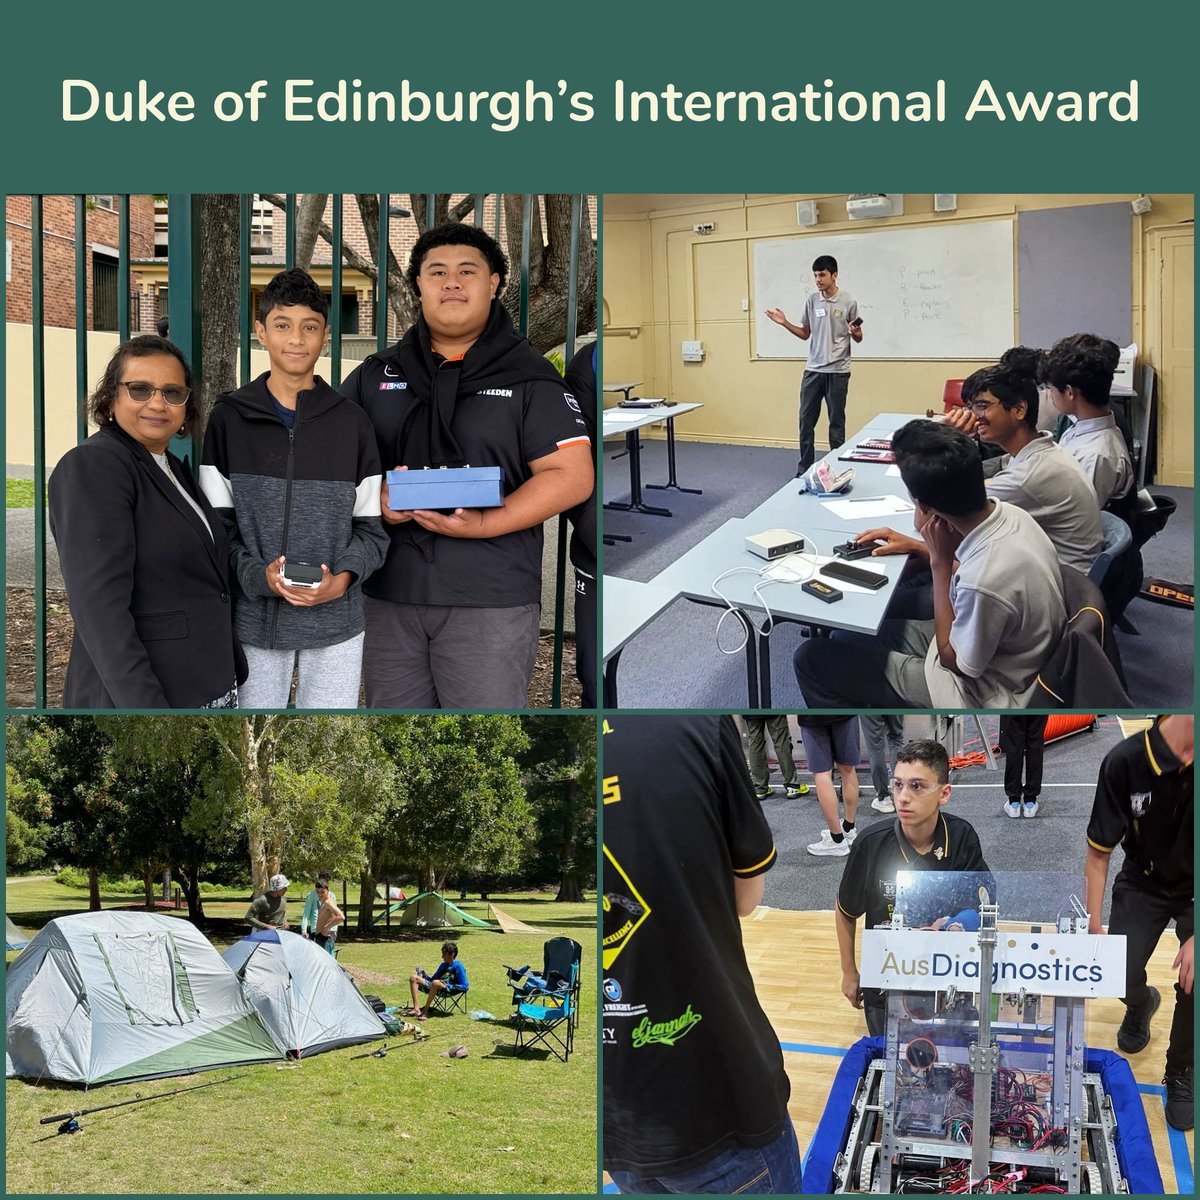 We’re excited to announce our participation in the Duke of Edinburgh’s Award, a leading global youth development program. Find out more: granvilleb-h.schools.nsw.gov.au/extra-curricul…

#dukeofedinburgh #dukeofedinburghaward #AimingforExcellence